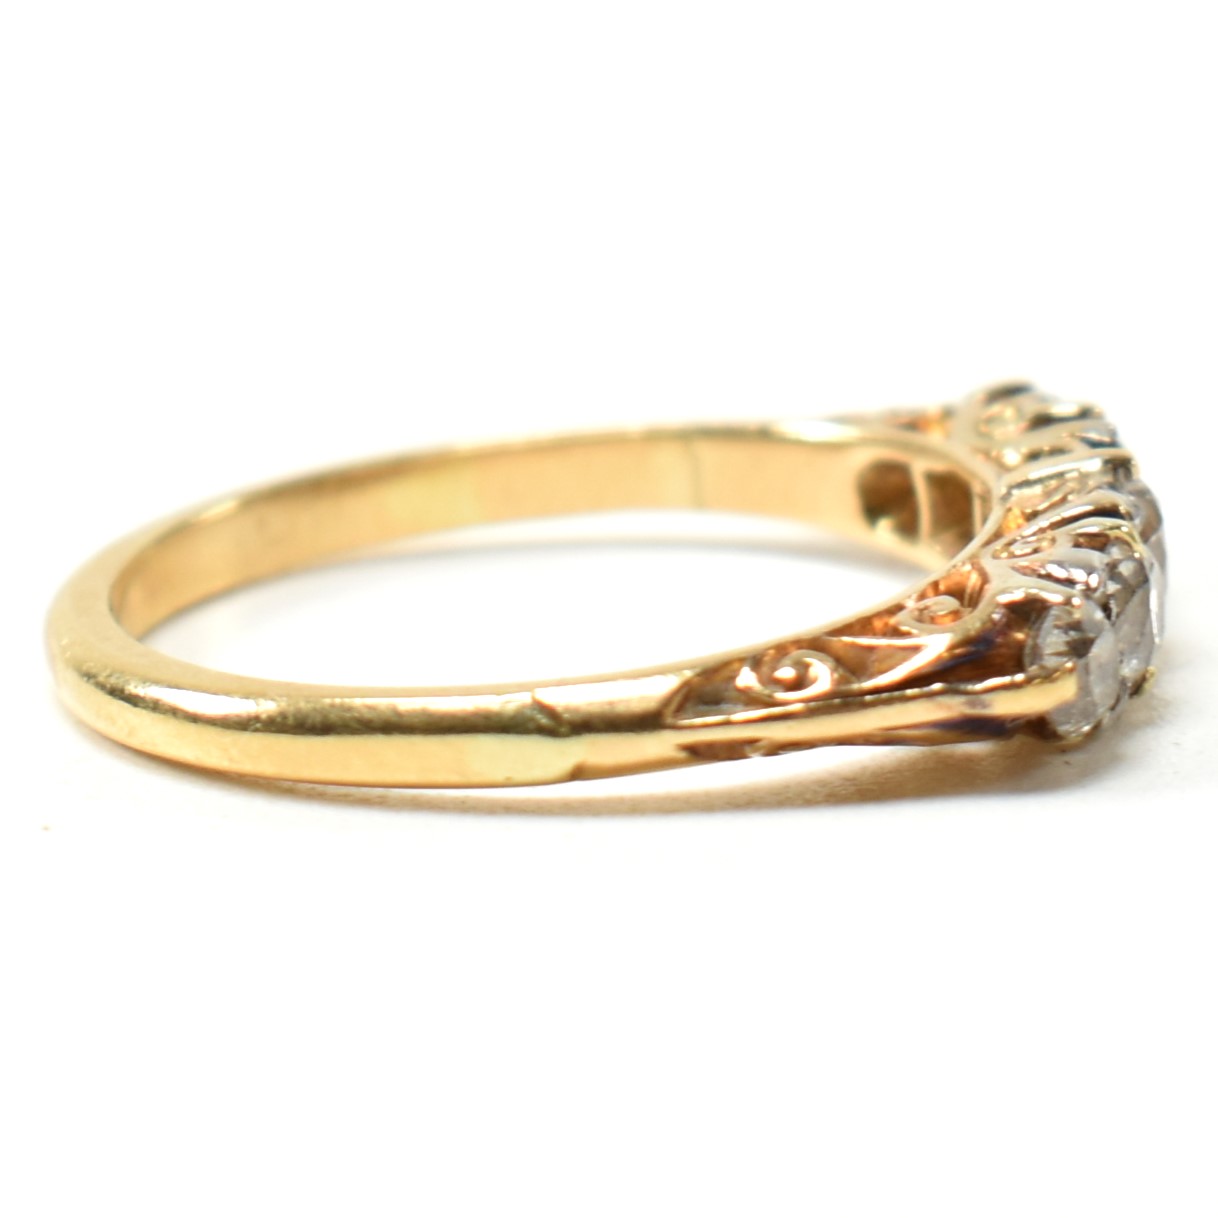 18CT GOLD & DIAMOND FIVE STONE RING - Image 4 of 8